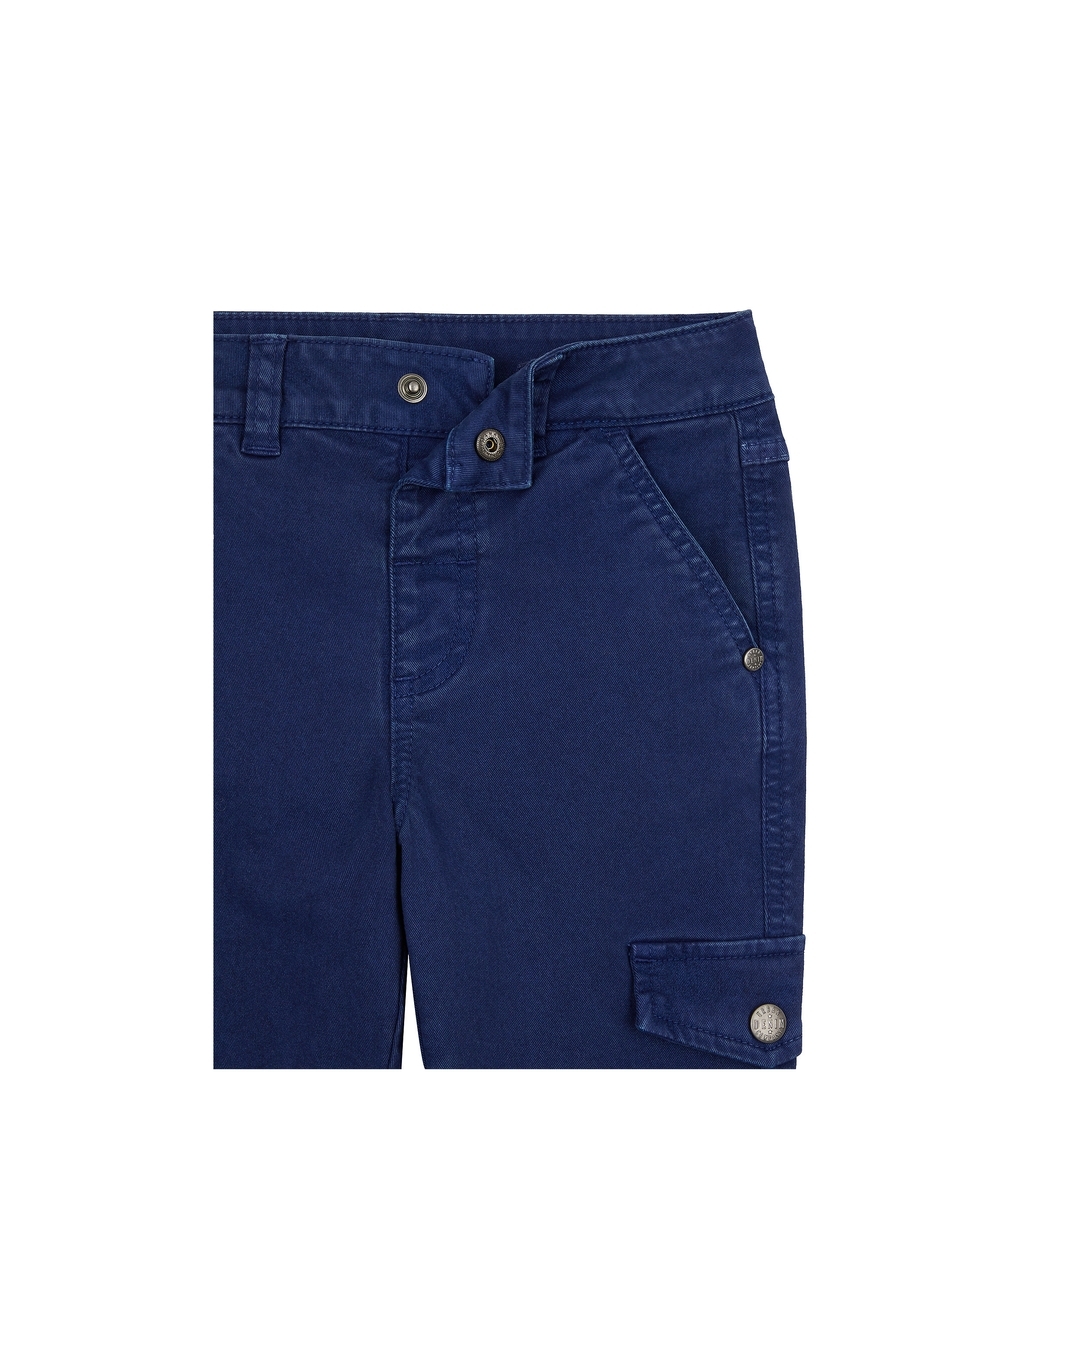 Buy Navy Trousers  Pants for Boys by Marks  Spencer Online  Ajiocom